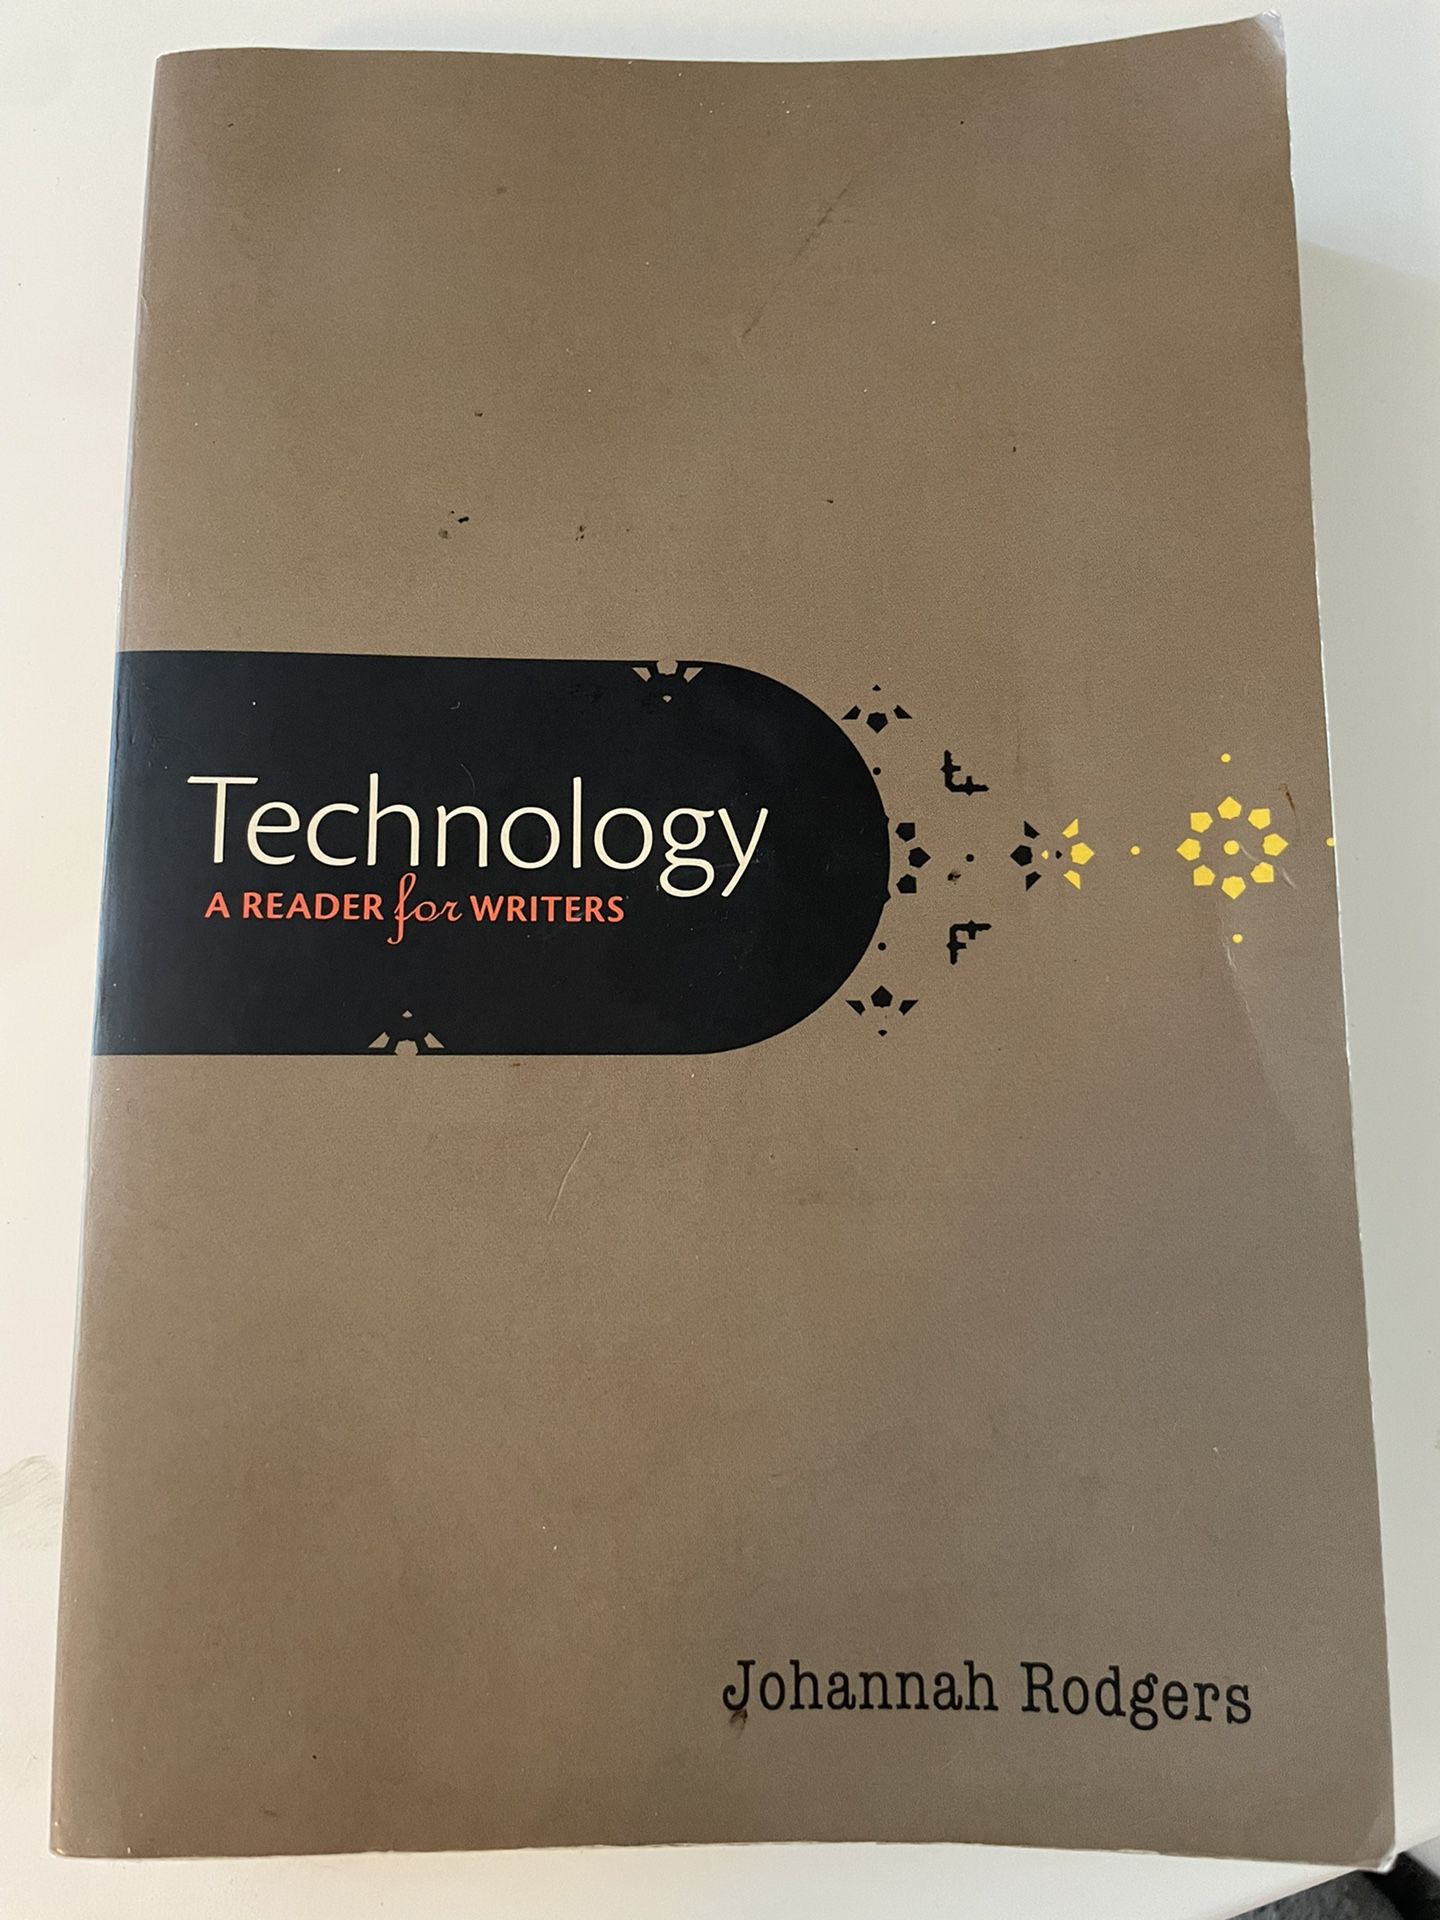 Technology book by Johannah Rodgers